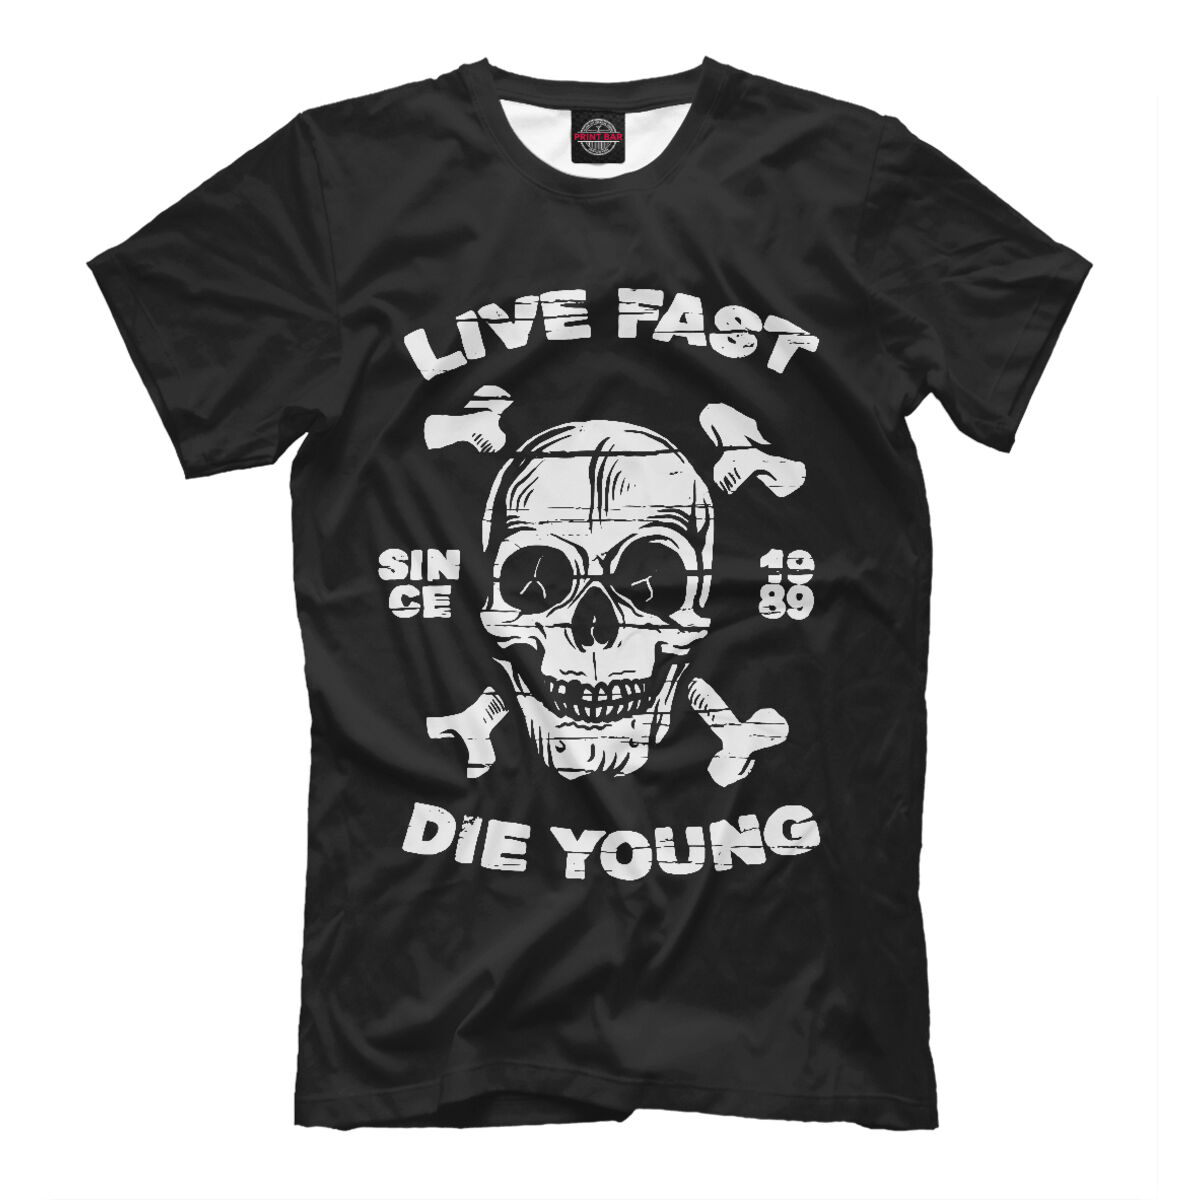 Life die young. Футболка Live fast, die young. Live fast die young. Live fast die young тату. Live fast die young надпись.